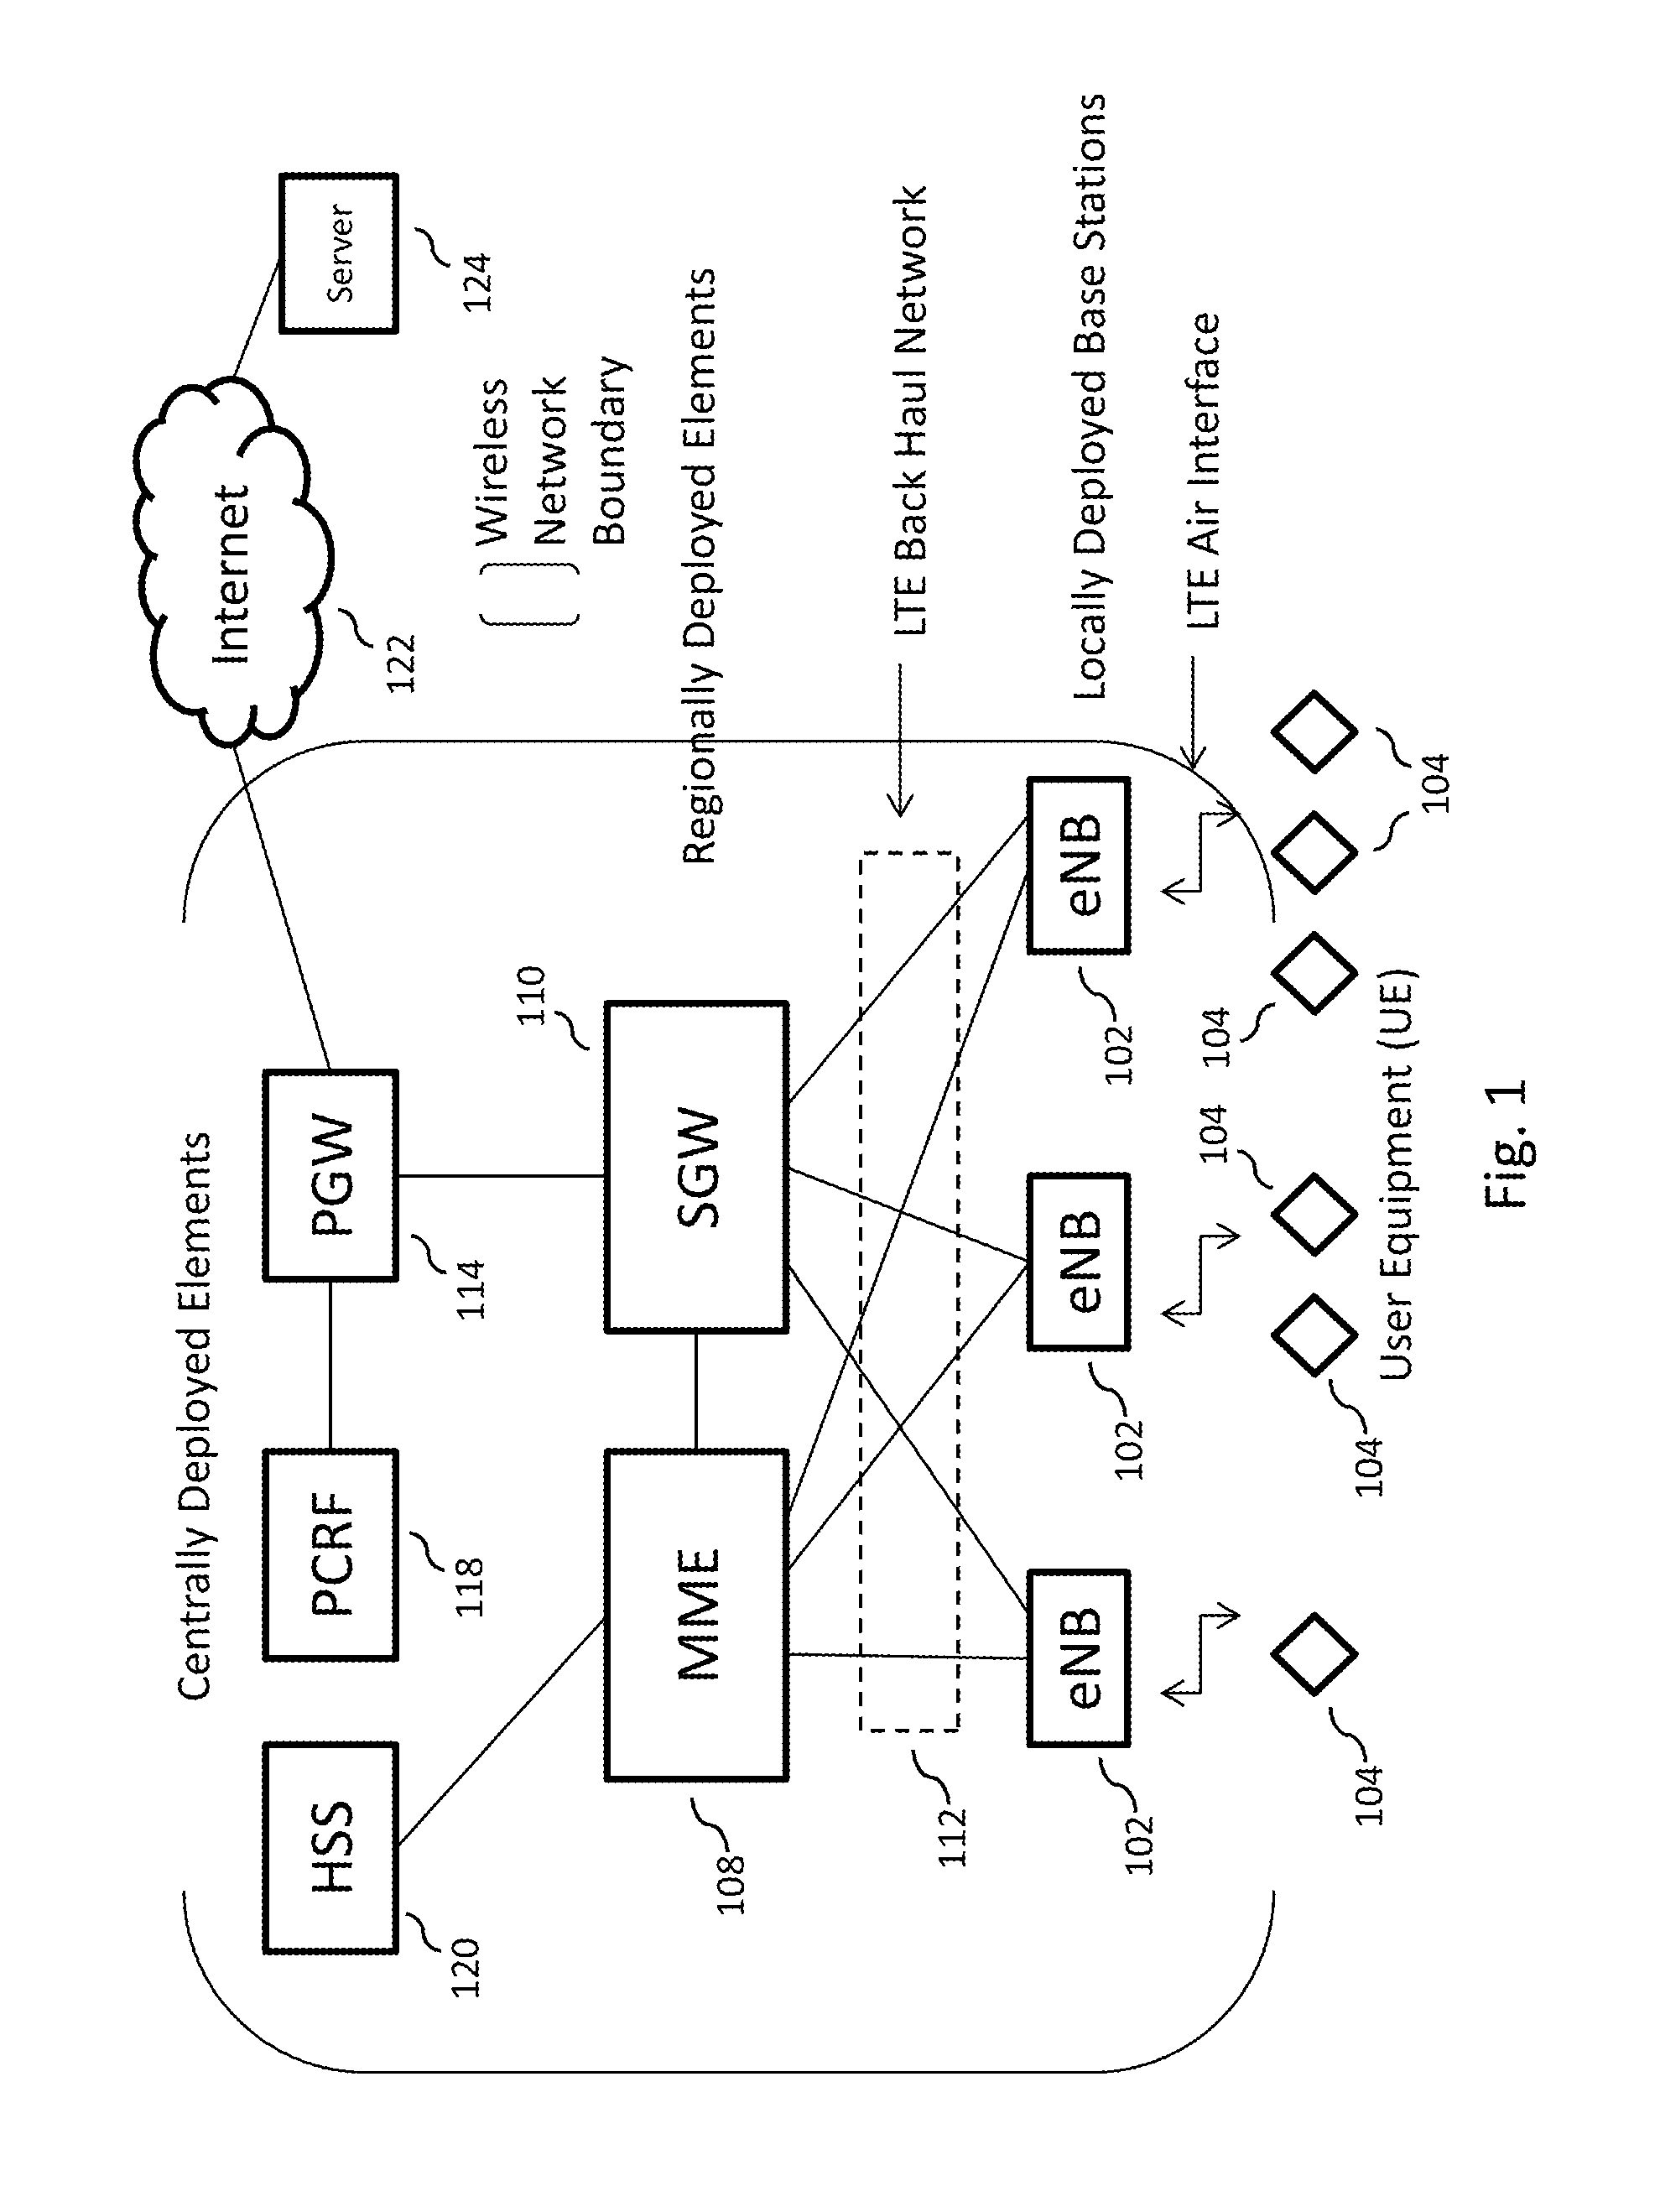 Operational constraints in LTE fdd systems using RF agile beam forming techniques